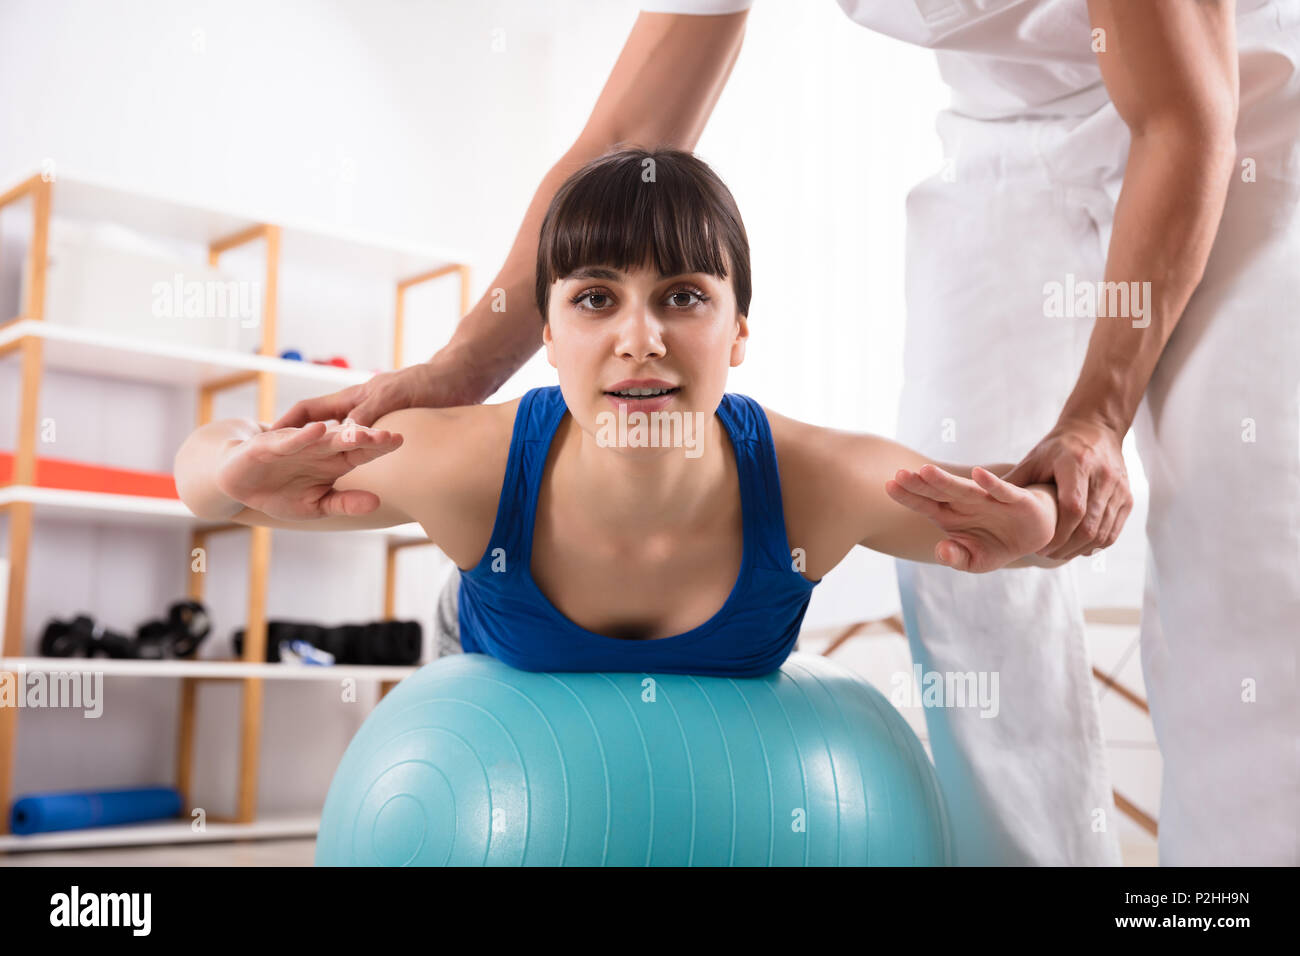 Physiotherapist Assisting Happy Woman While Doing Exercise On Fitness Ball Stock Photo